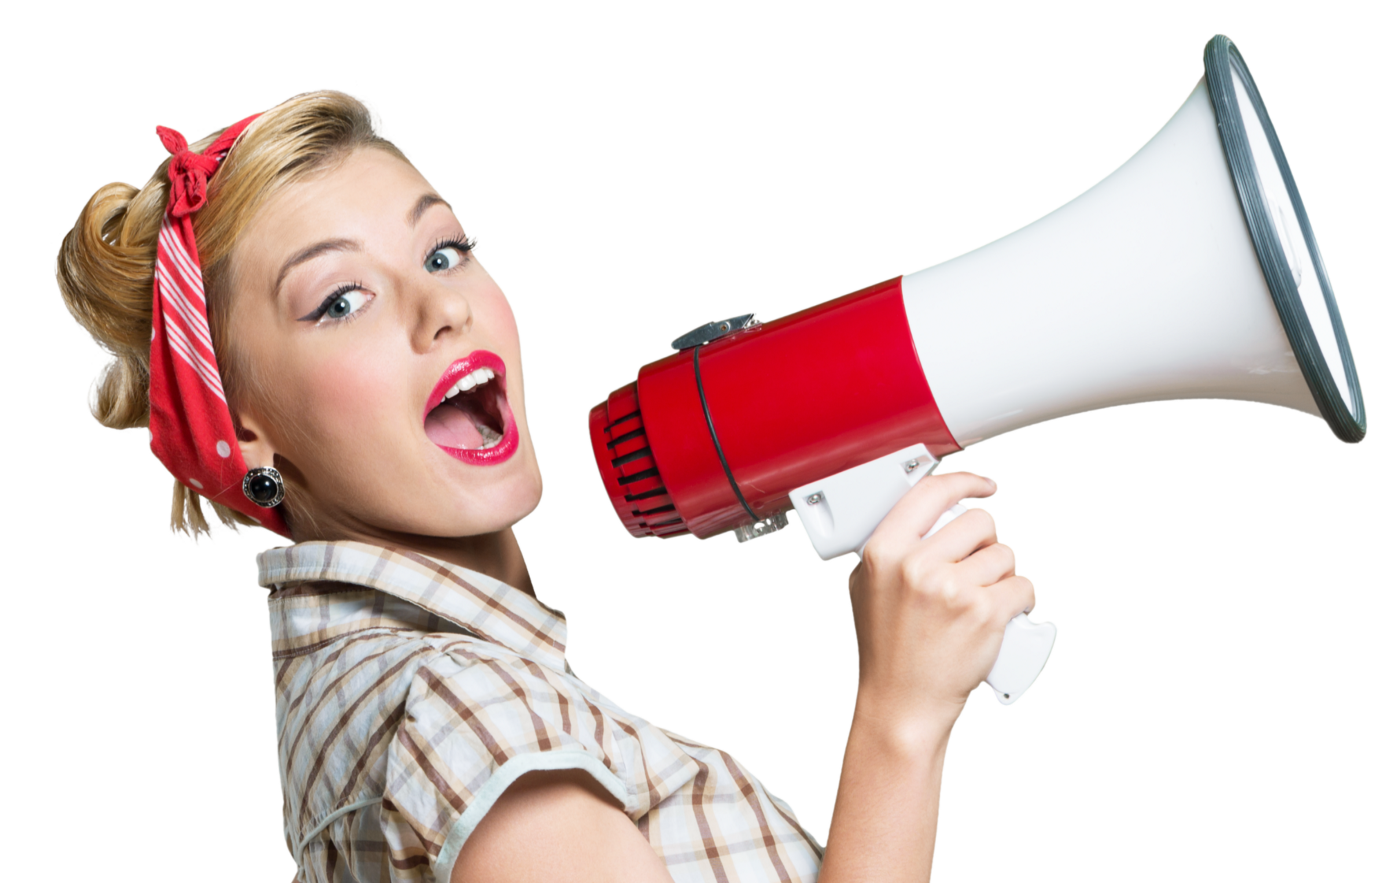 An image of a woman holding a megaphone